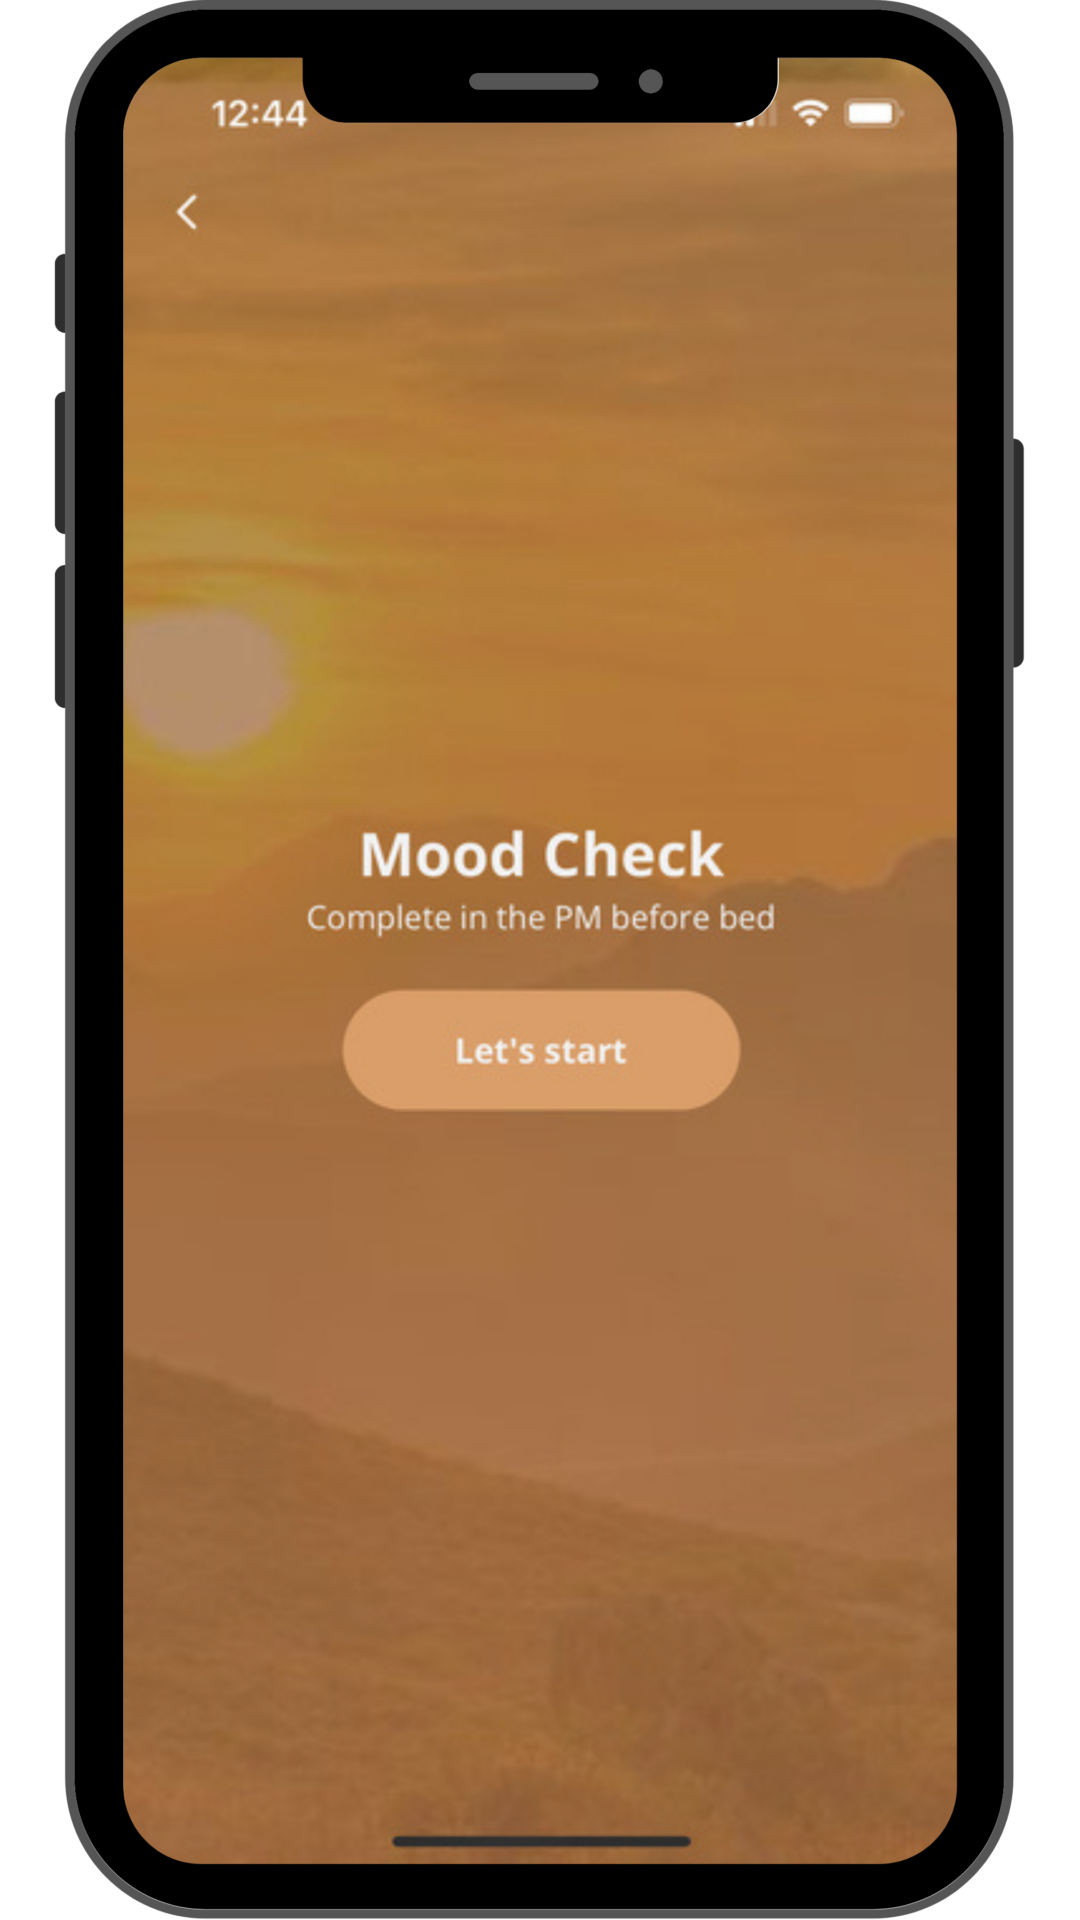 GLOW Phone Demo: MINDFULNESS: In-app check-ins